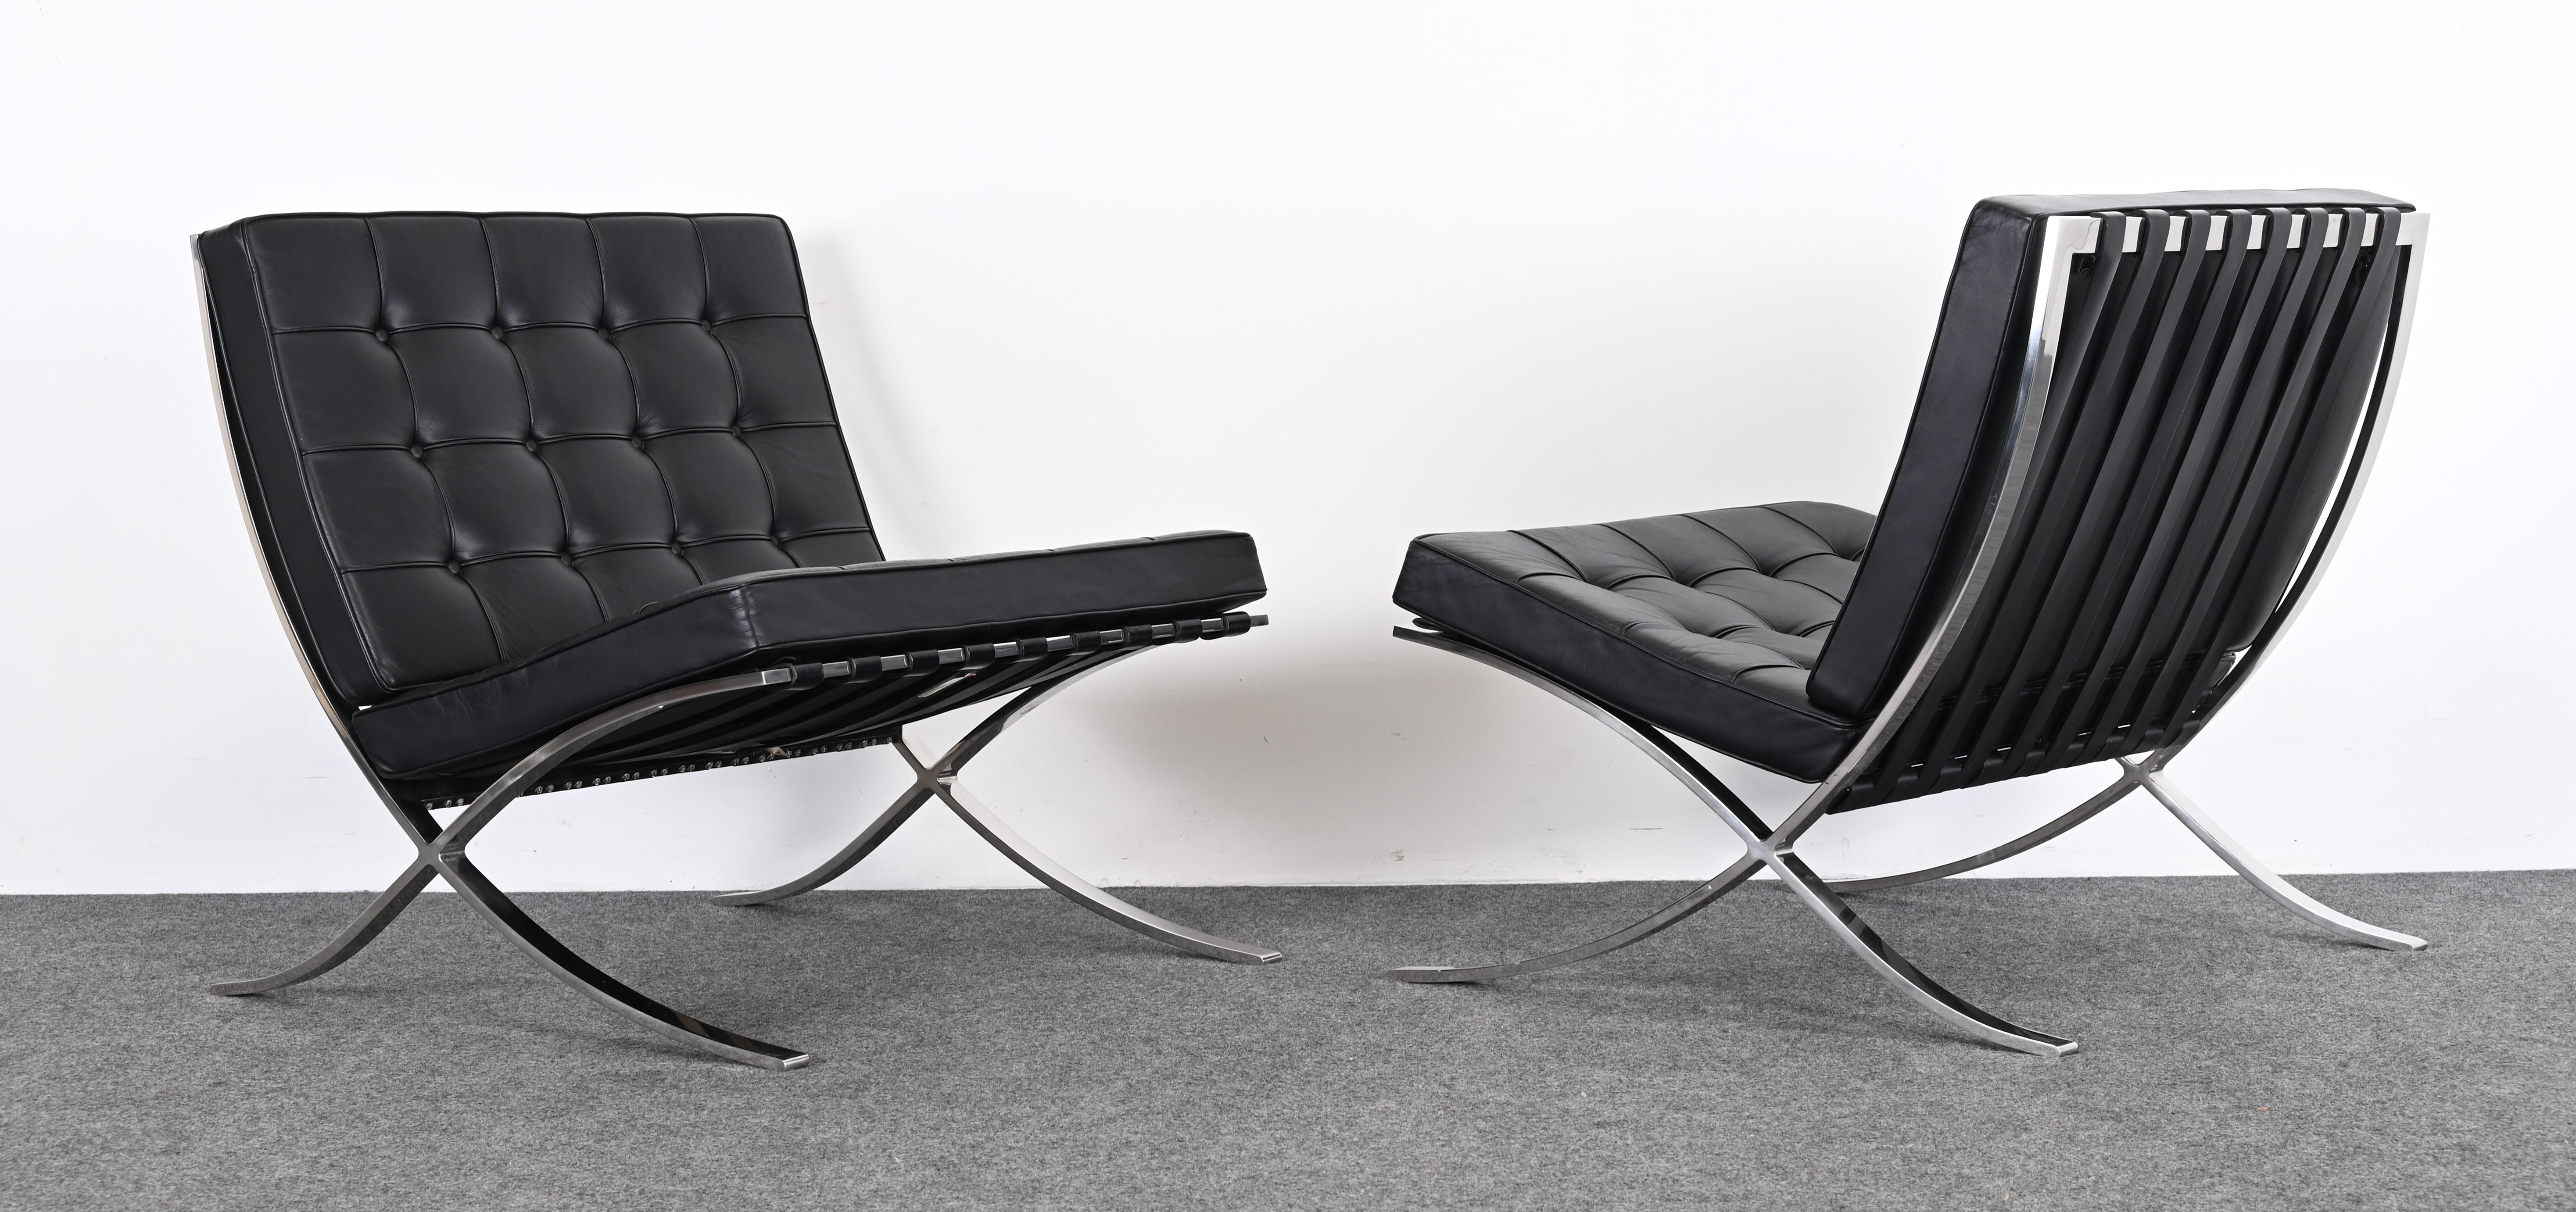 American Pair Ludwig Mies van der Rohe Barcelona Chairs for Knoll Associates, Inc., 1960s